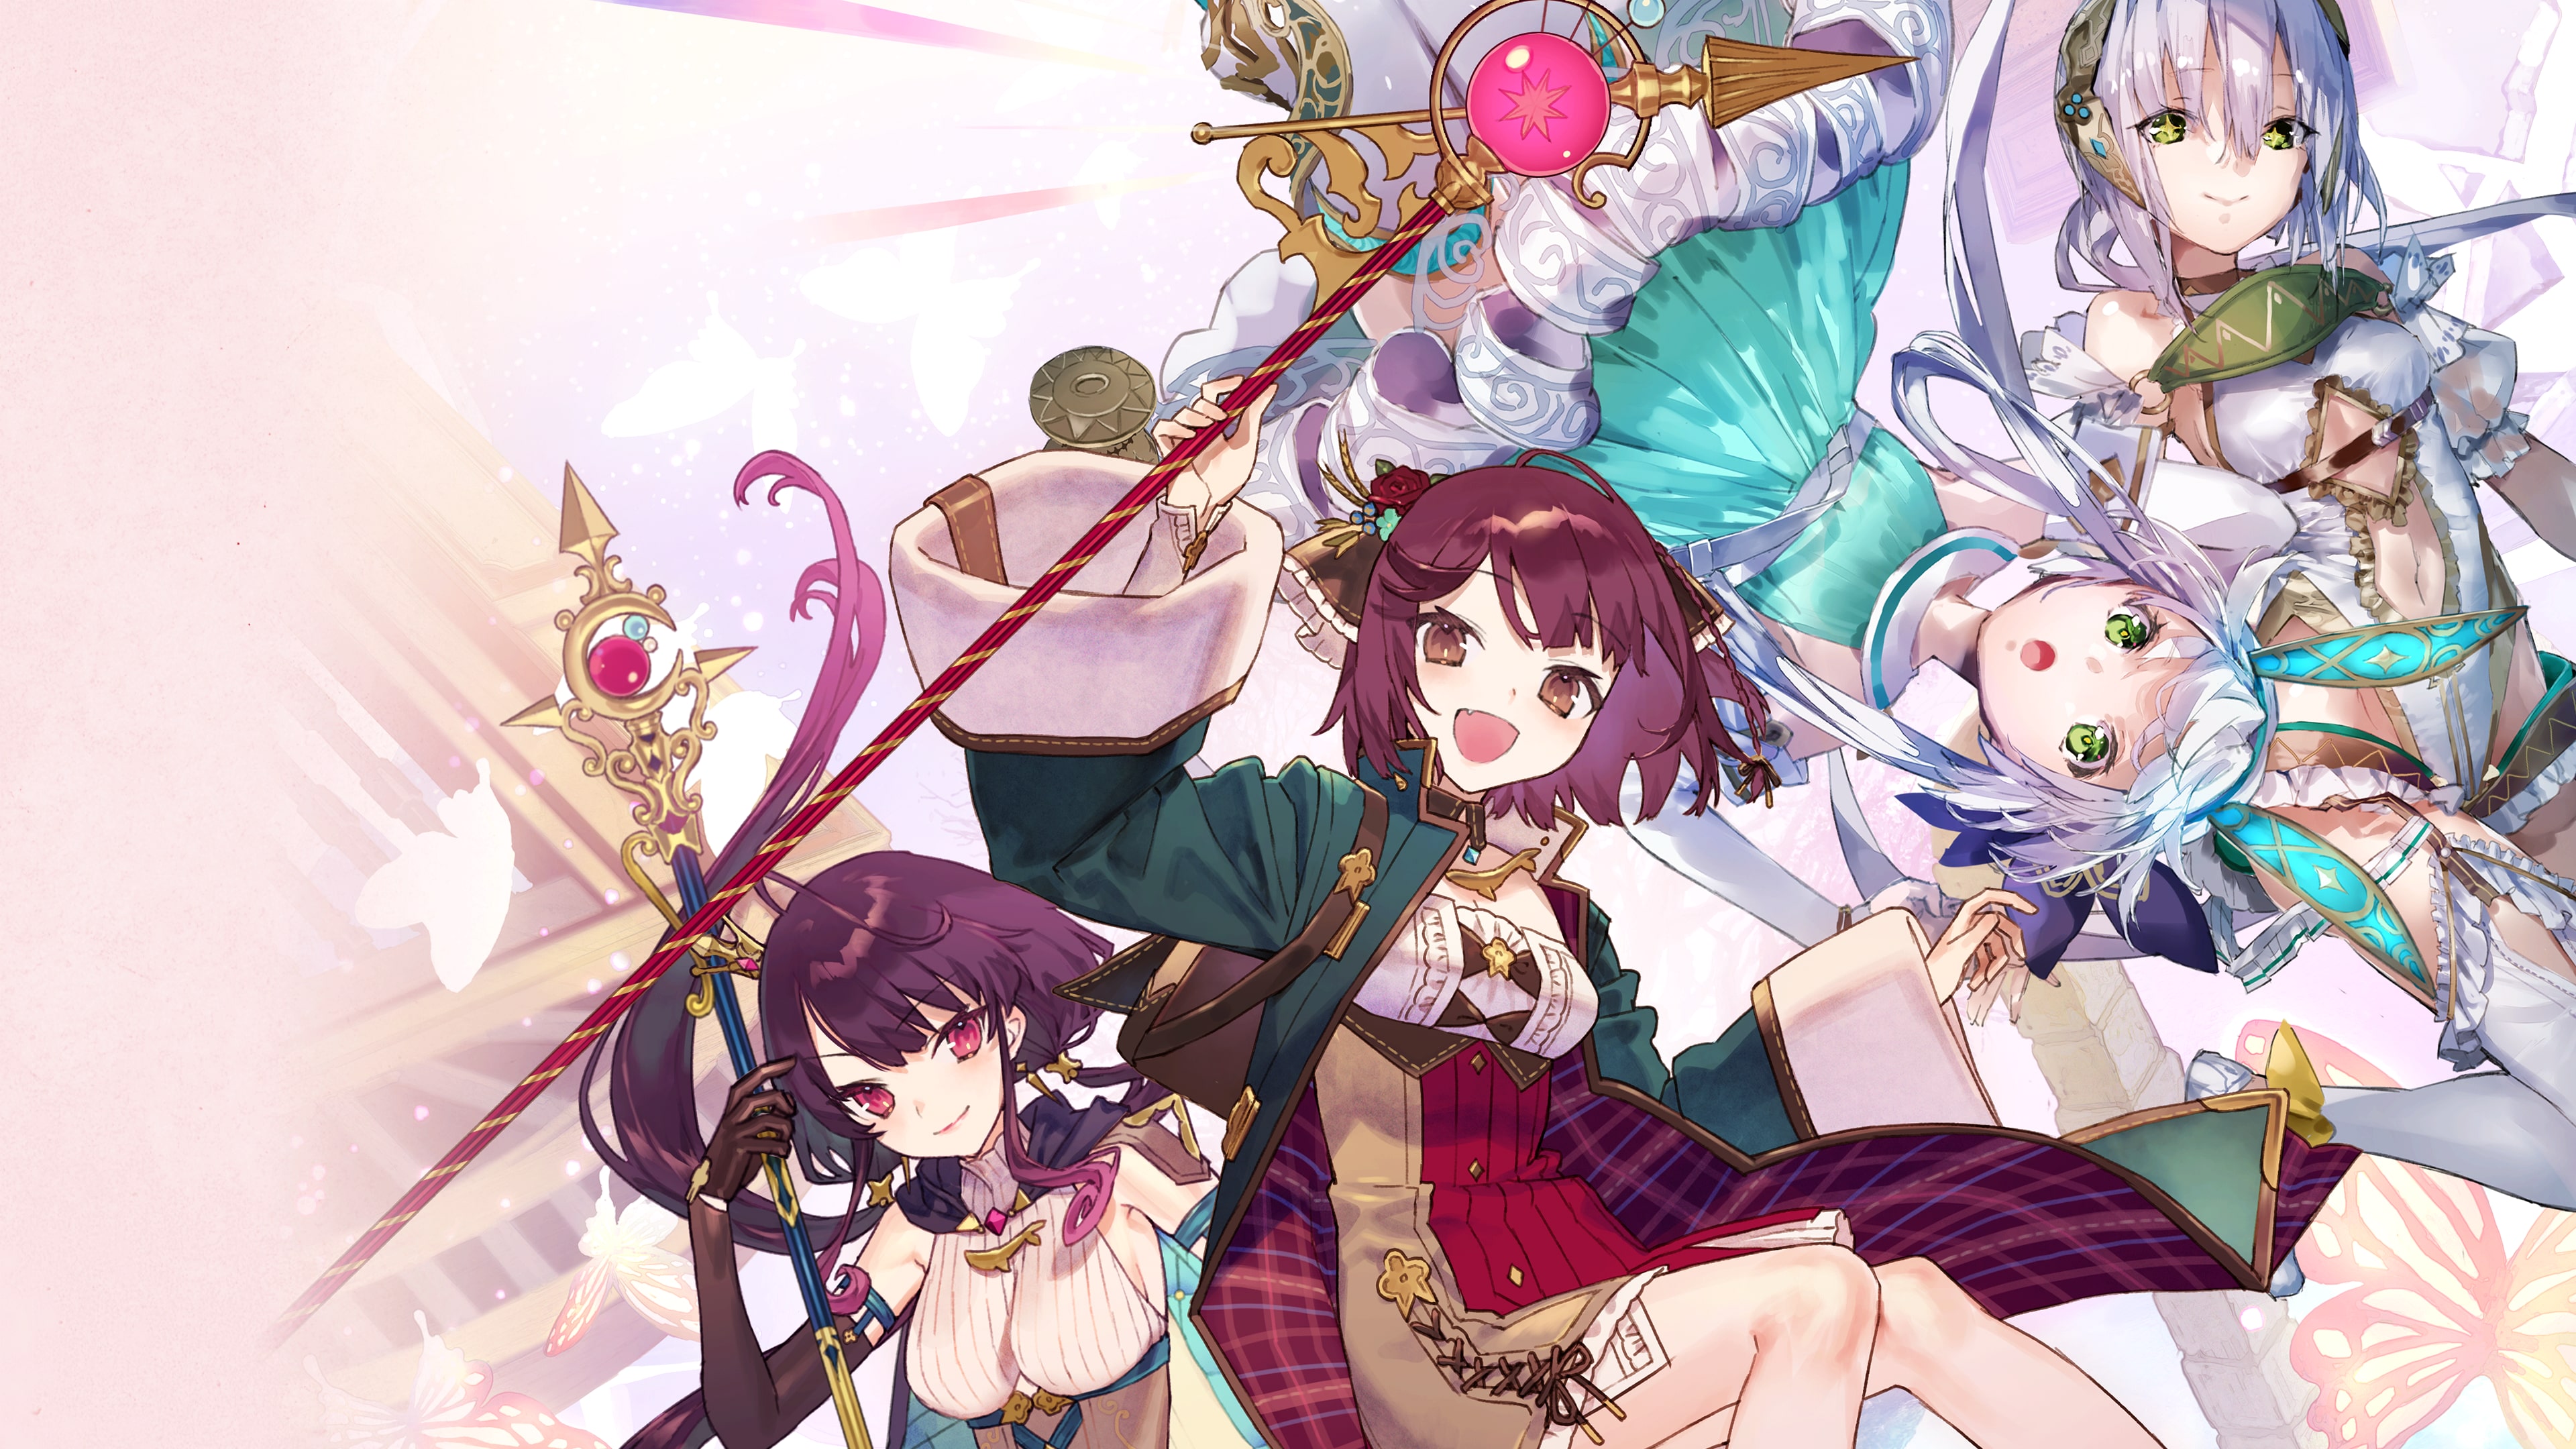 Atelier Sophie 2: The Alchemist of the Mysterious Dream Digital Deluxe Edition (English)